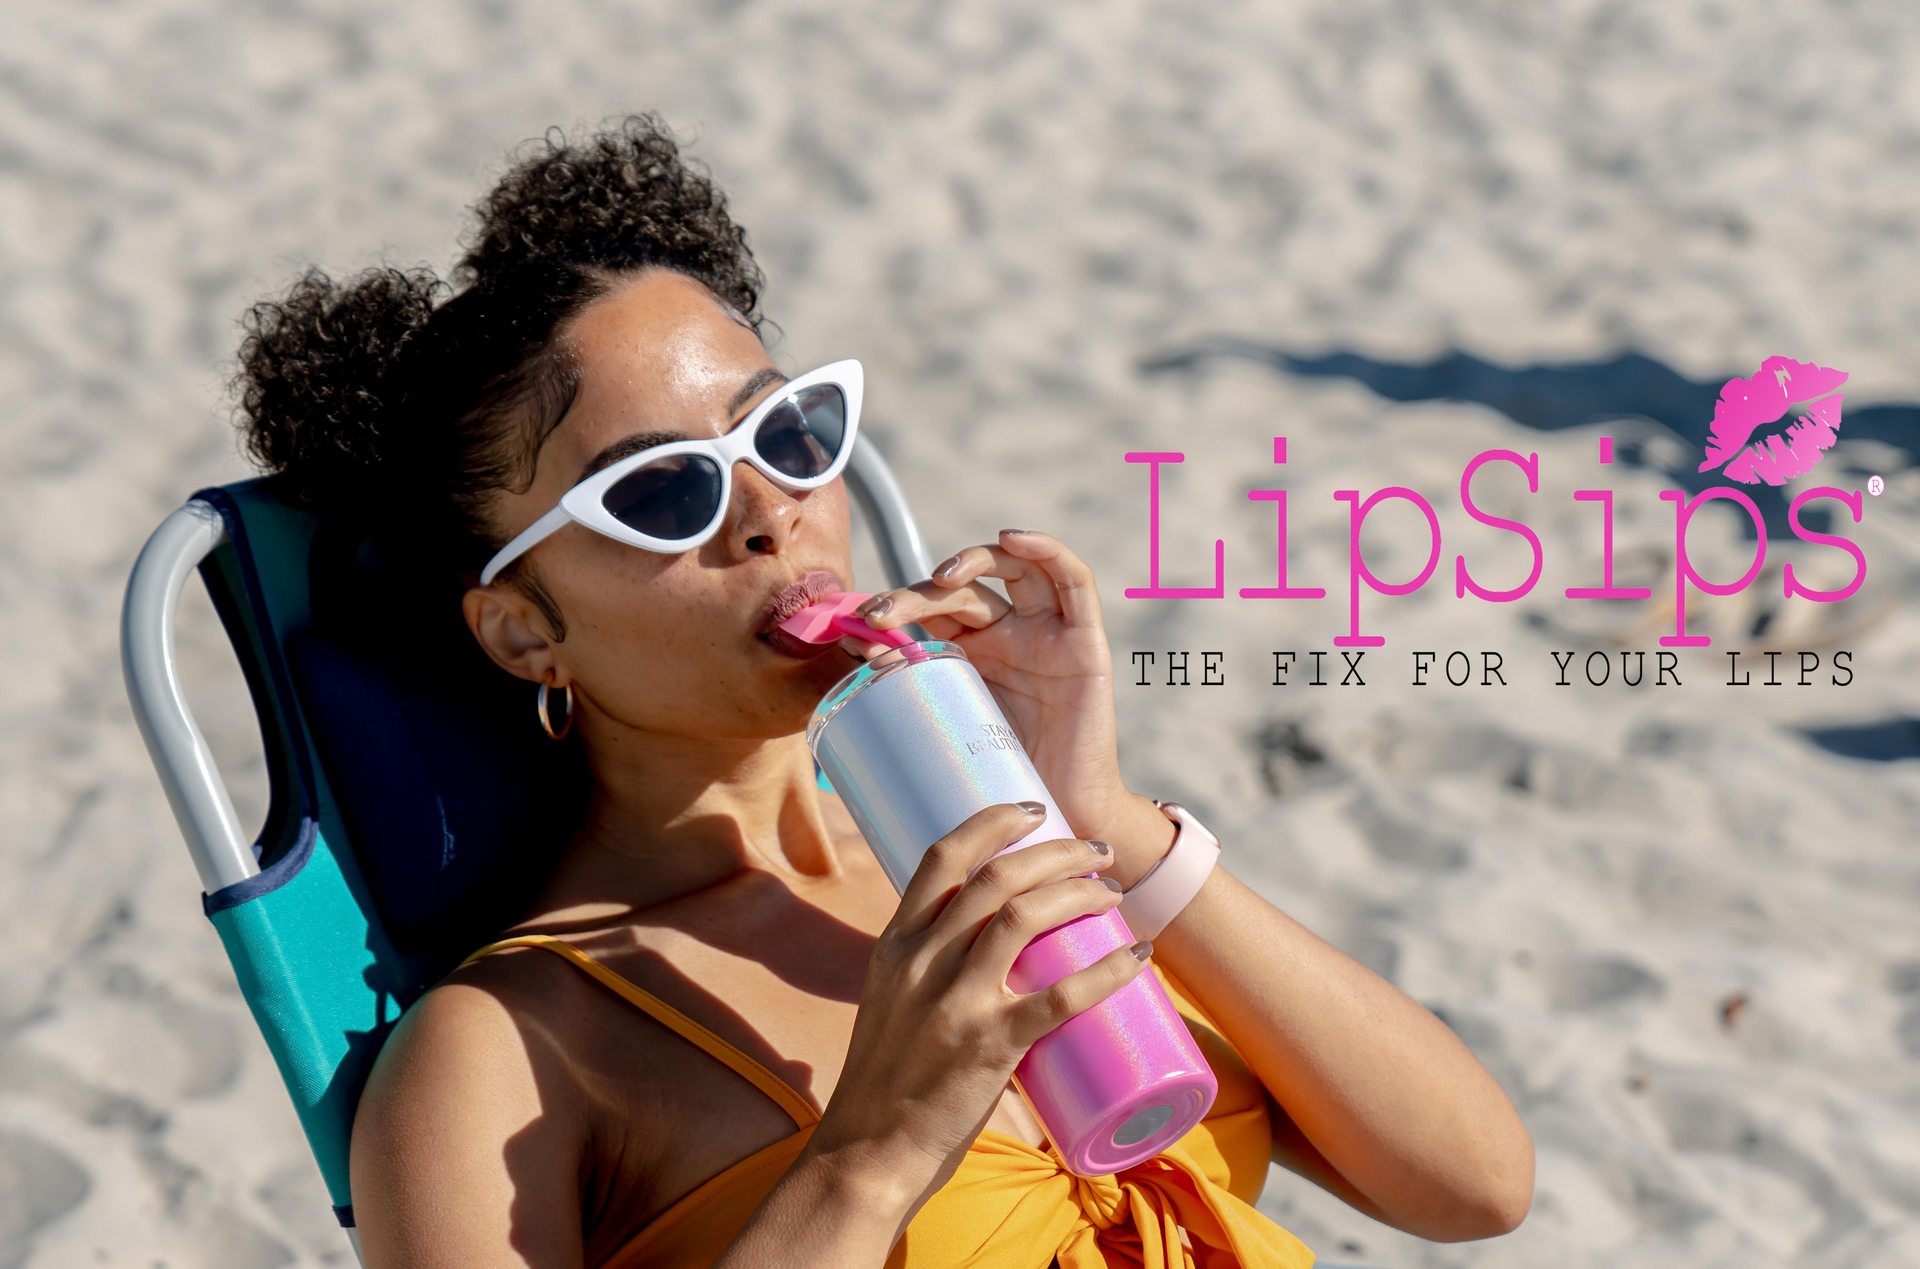  LipSip. Sip from a straw without pursing your lips to help  prevent lip lines & wrinkles. Includes detachable LipSip, reusable silicone  straw & cleaner. BPA-free dishwasher safe Ecofriendly (Red) : Home